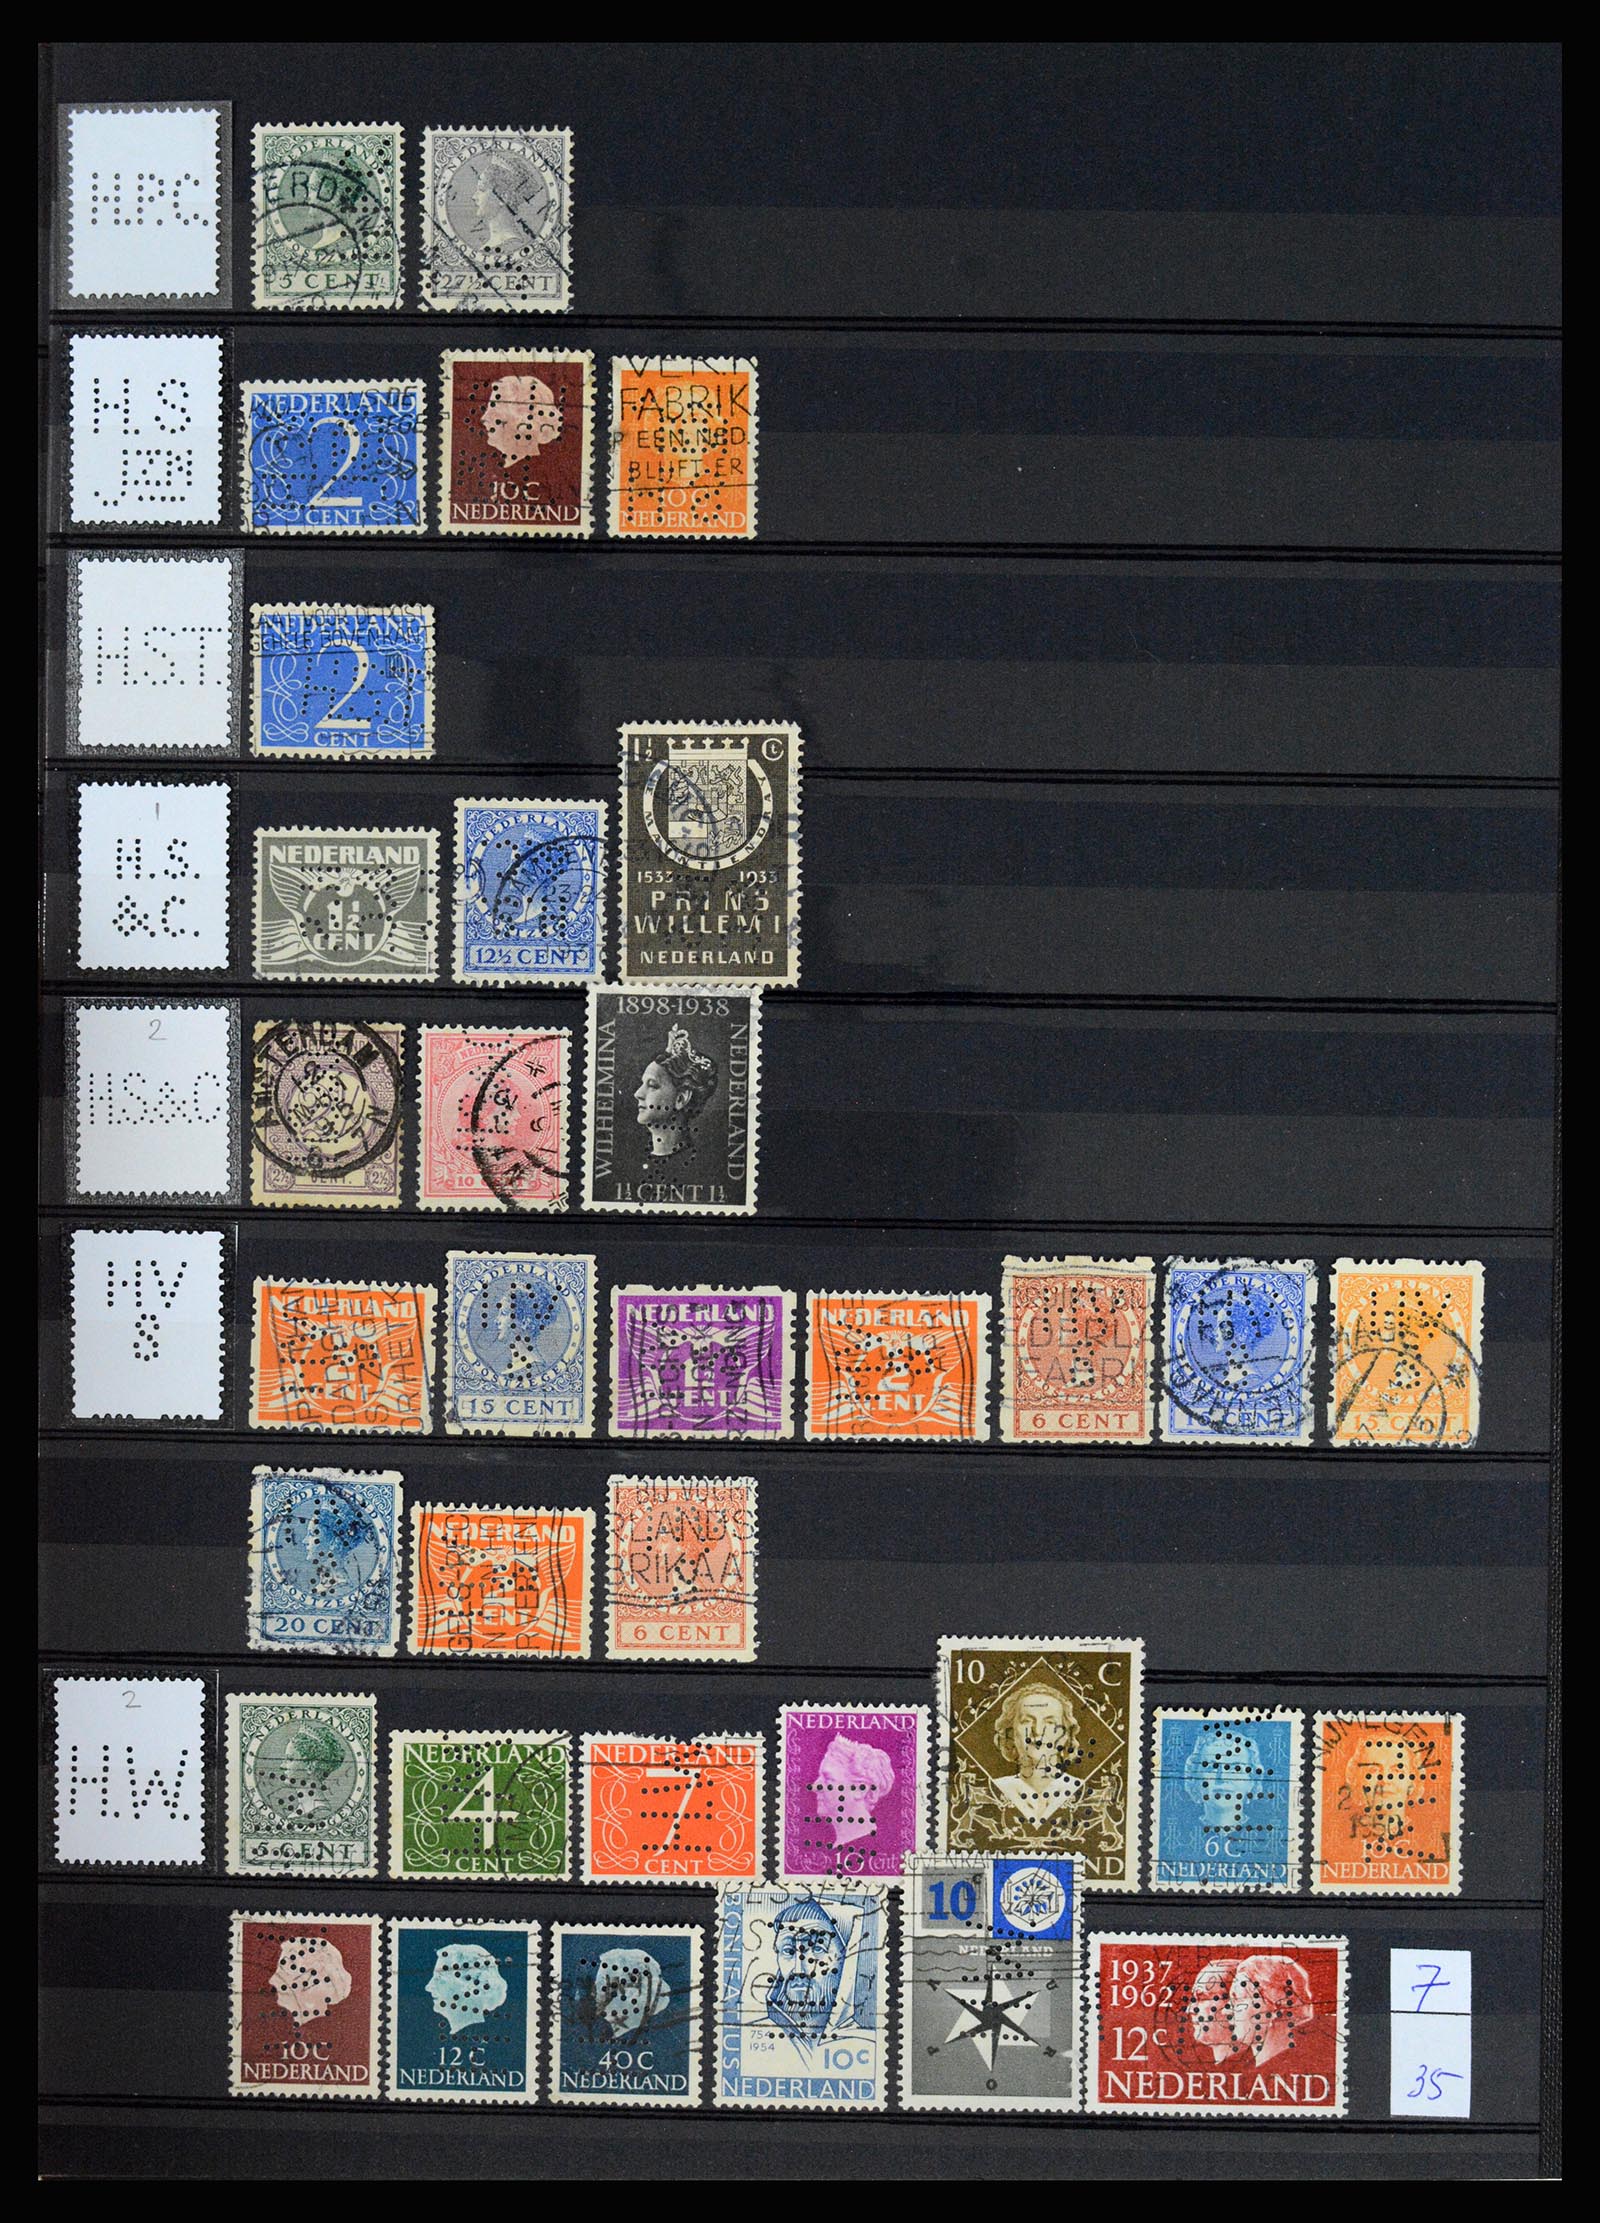 37183 019 - Stamp collection 37183 Netherlands perfins 1872-1960.